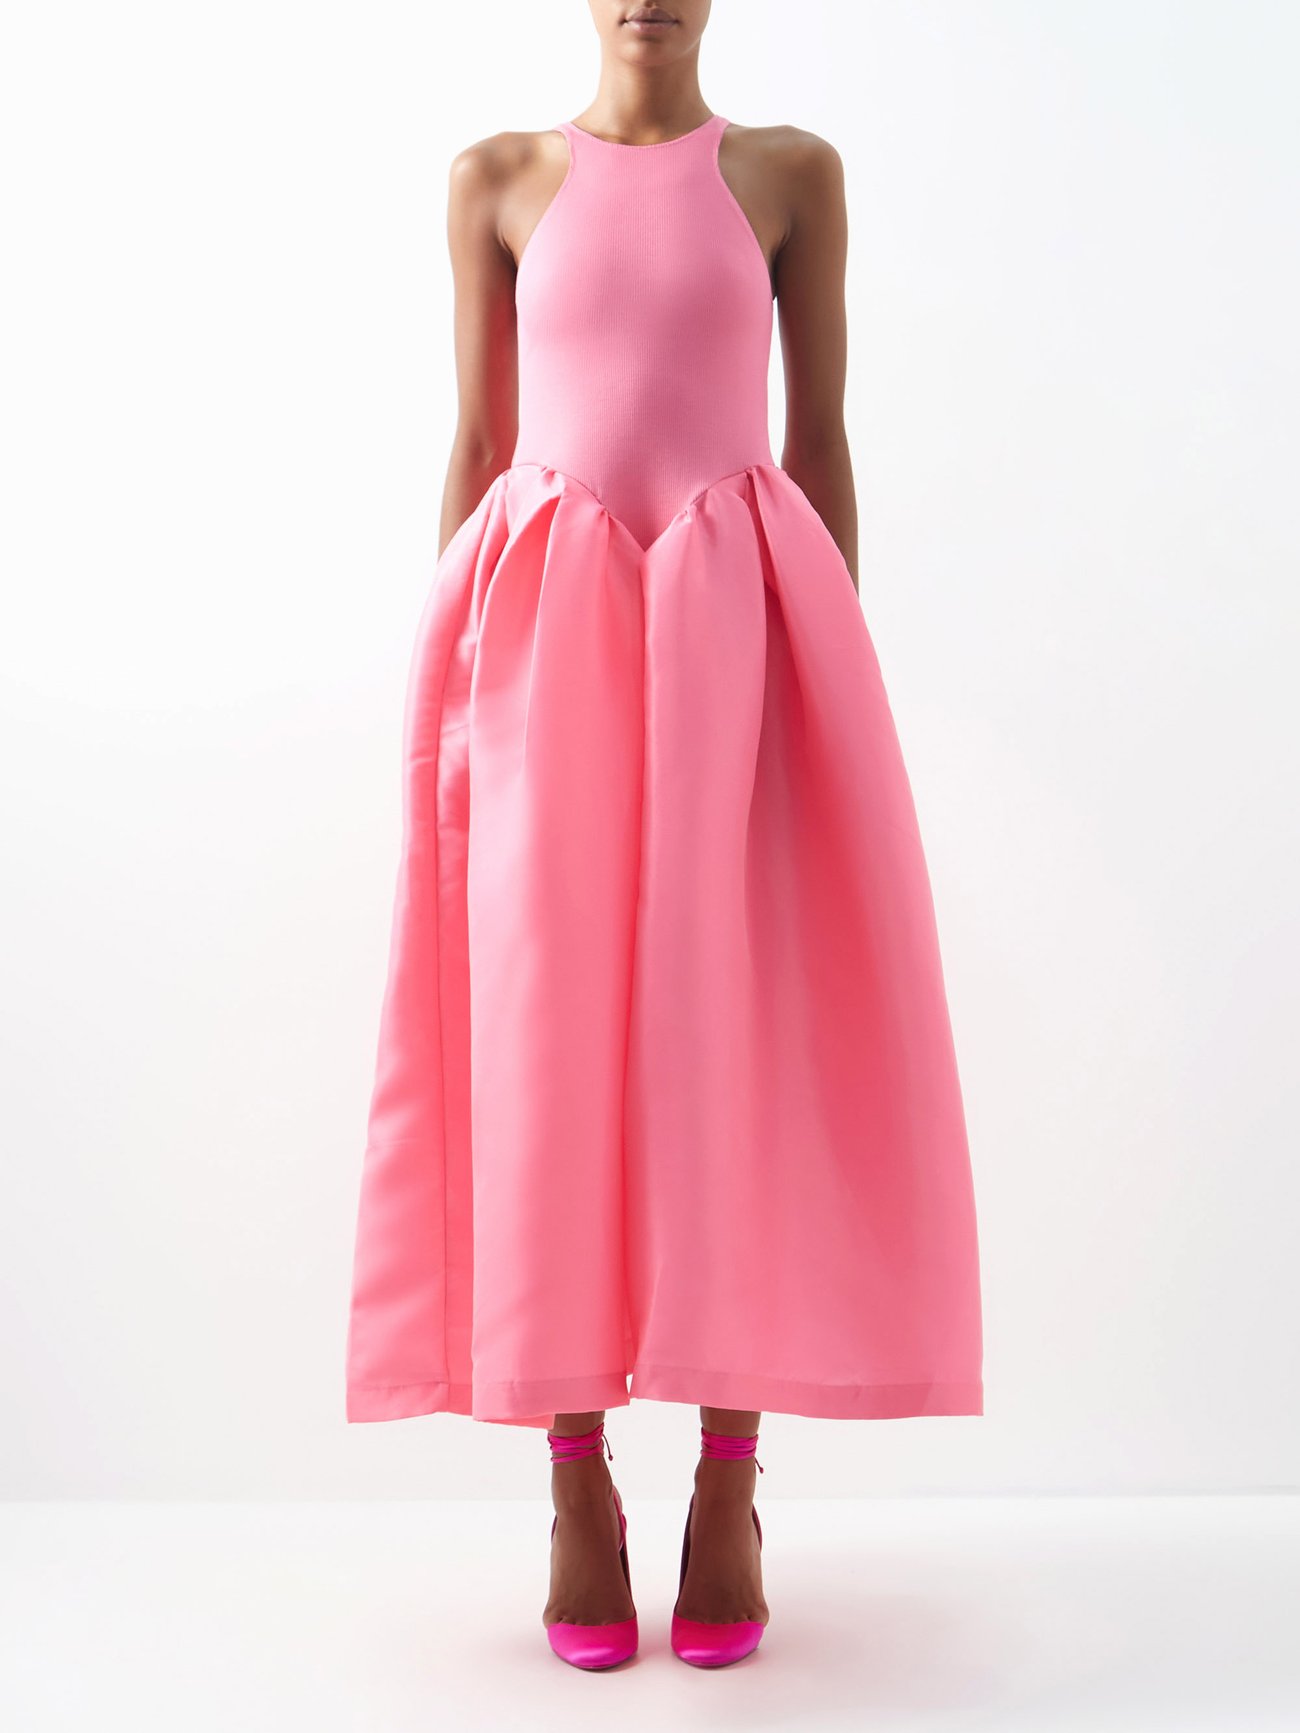 Marques'Almeida tempers the body-contouring ribbed bodice of this pink organic cotton-blend dress with a statement flared skirt, cut from swathes of crisp taffeta. It has a v-cut waist and reaches almost to the ankles. 